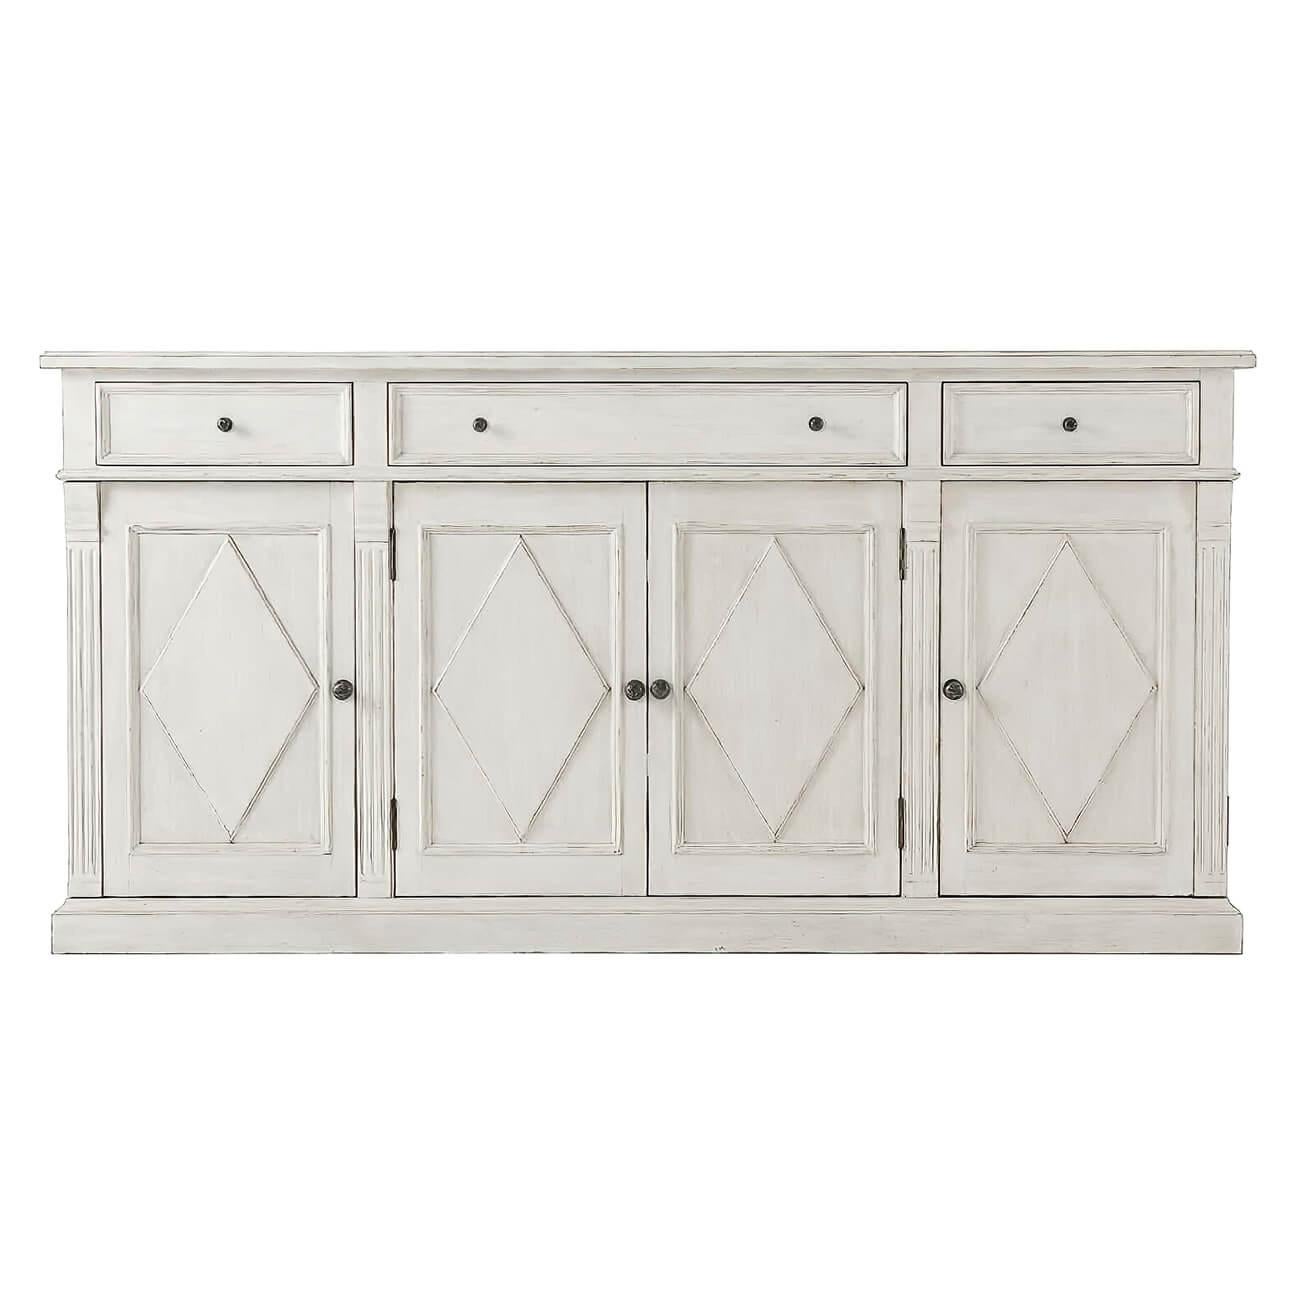 Northern European style distress painted buffet sideboard with a molded edge rectangular top, one long and two small drawers in the frieze, with lozenge paneled doors and sides, antique pewter handles, and carved fluted details on a square plinth